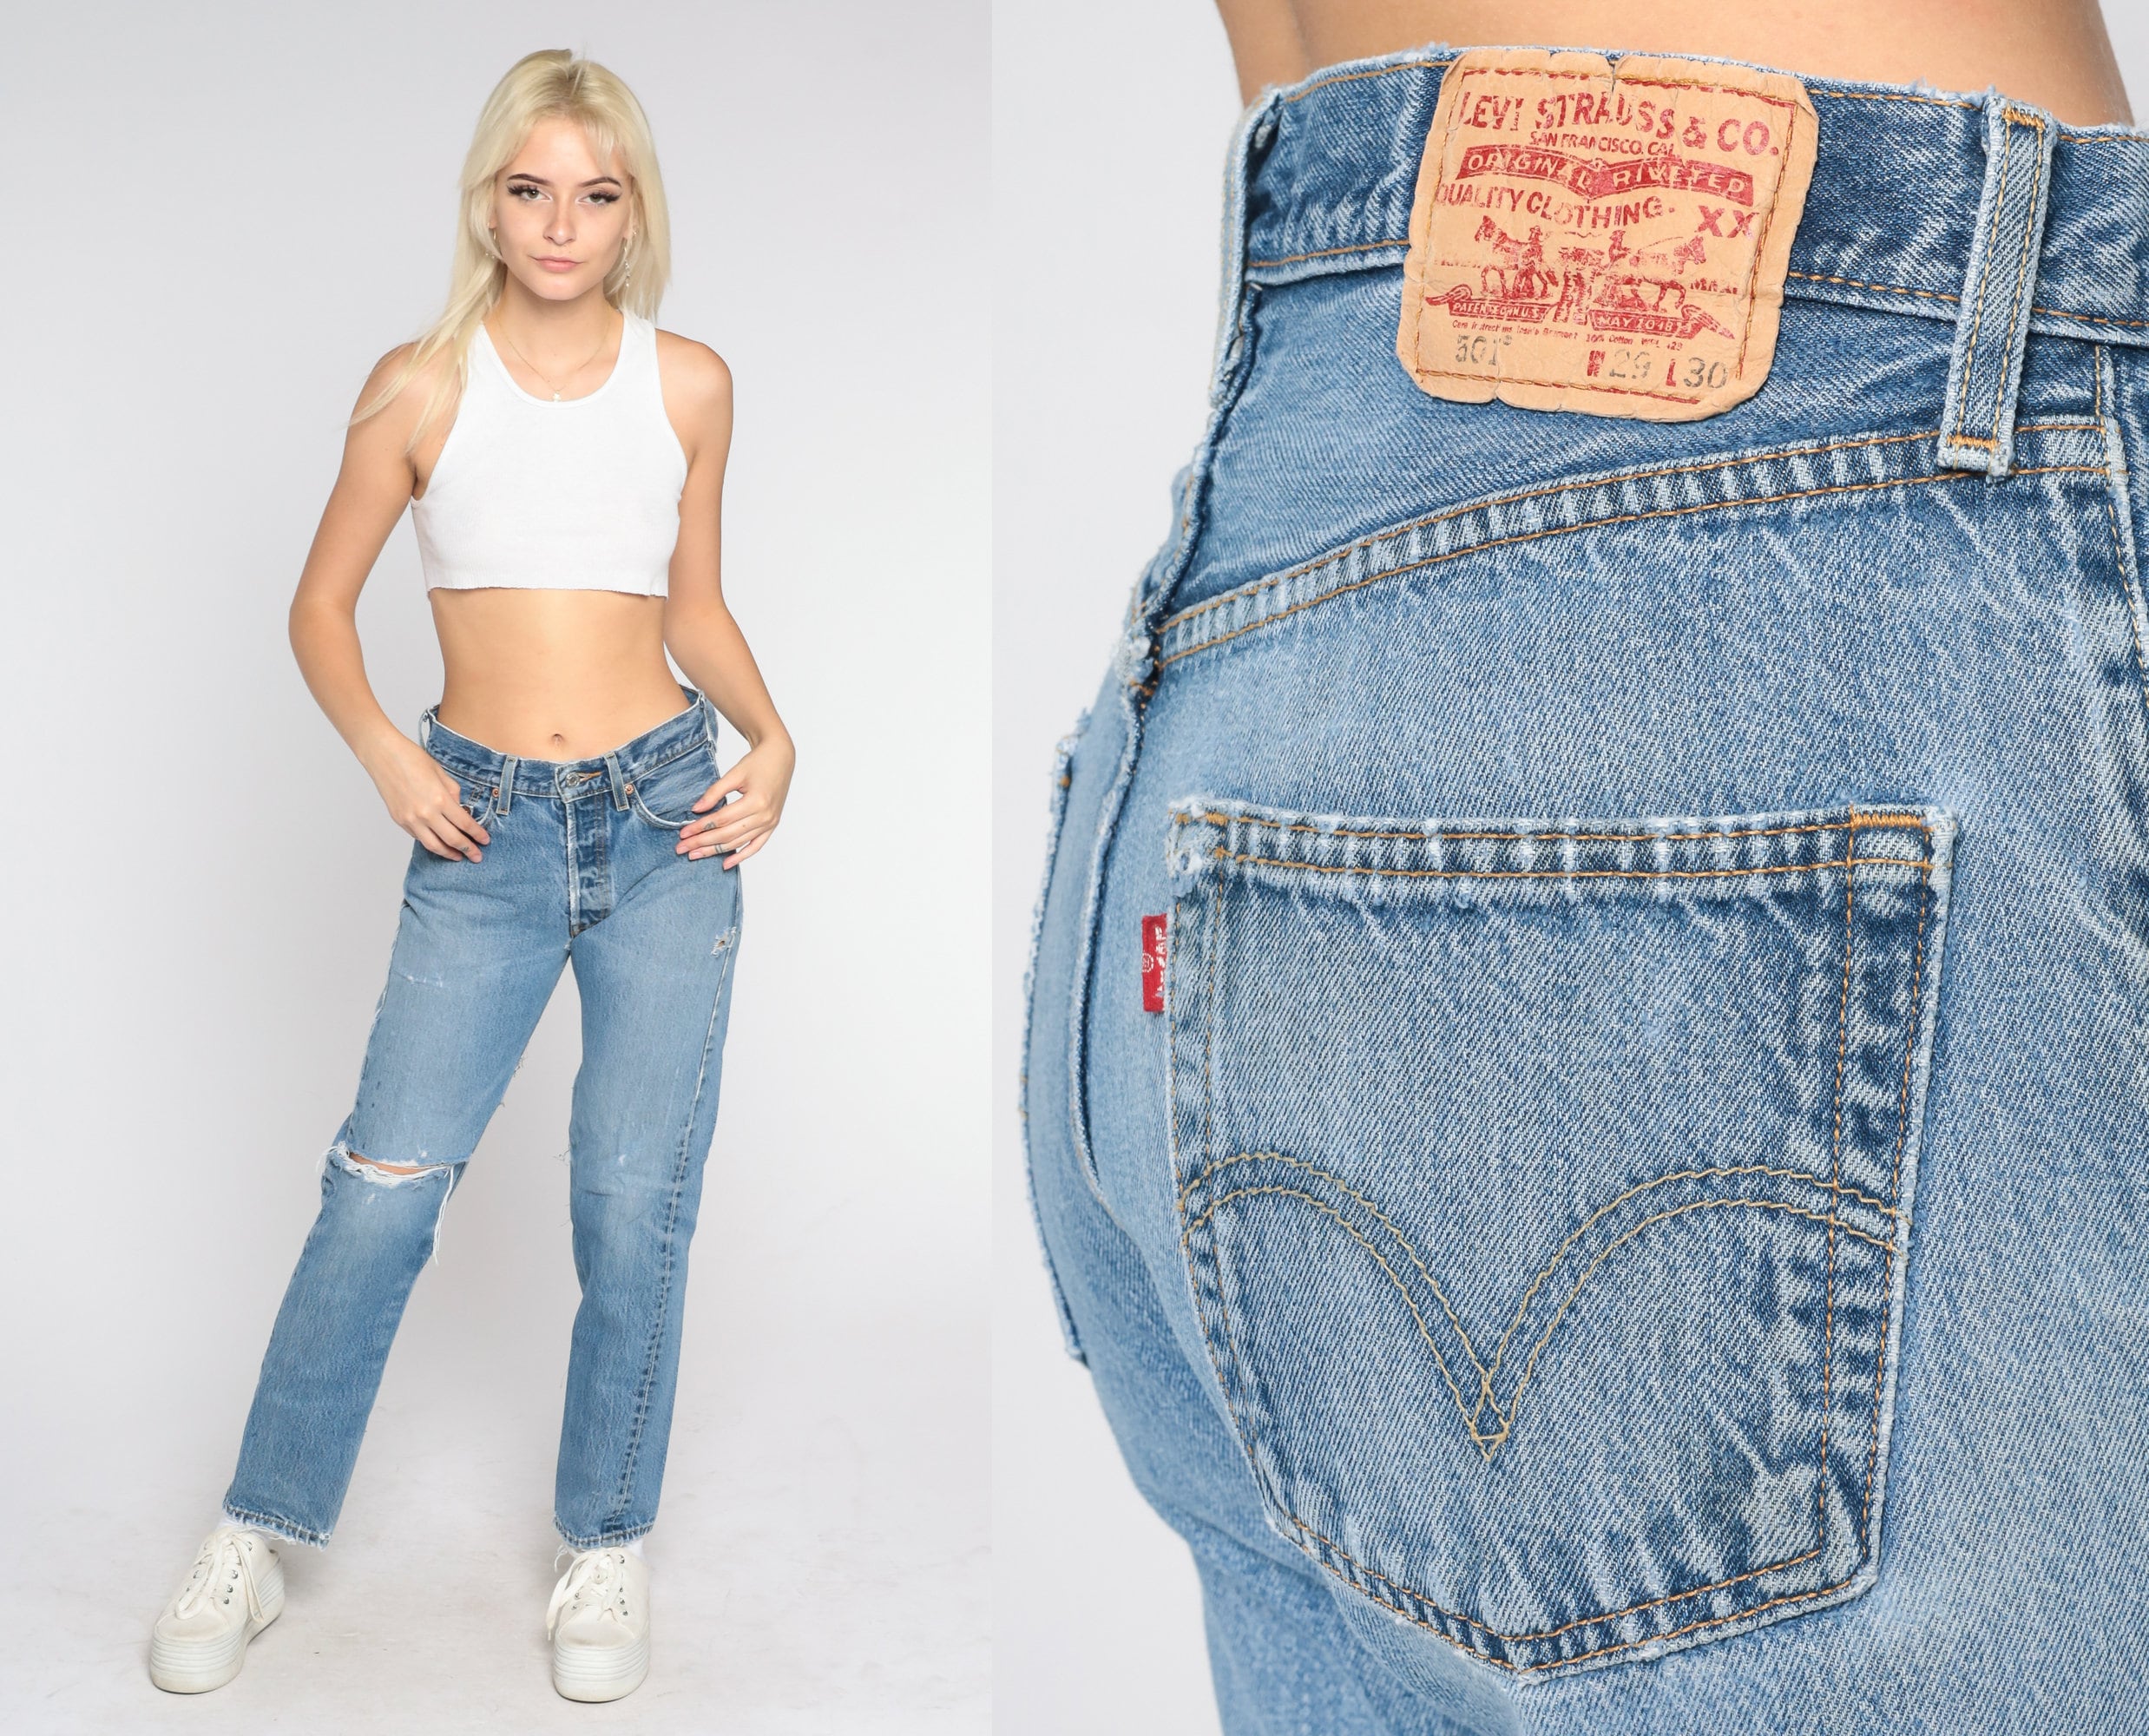 Levis Ripped Jeans - Etsy